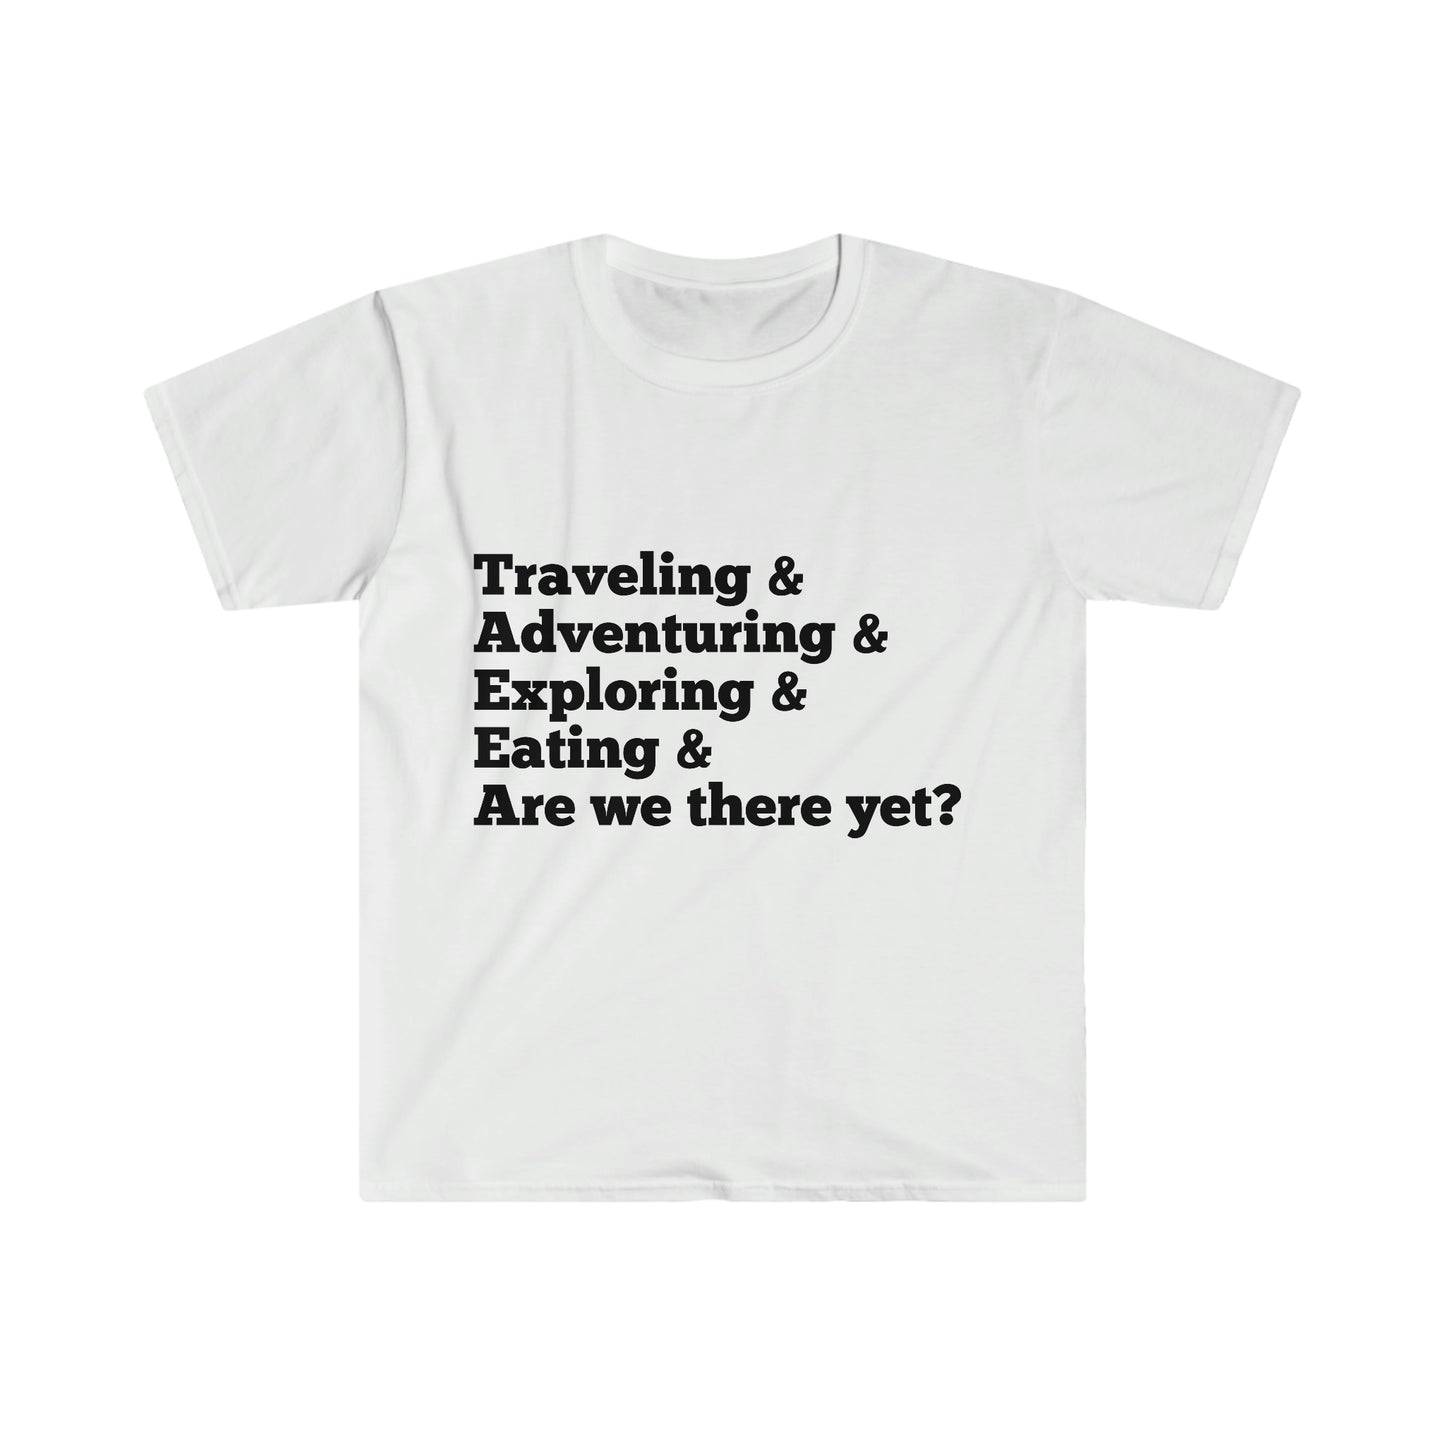 Travel and Adventure T-shirt A Perfect Gift for the Avid Traveler in Your Life